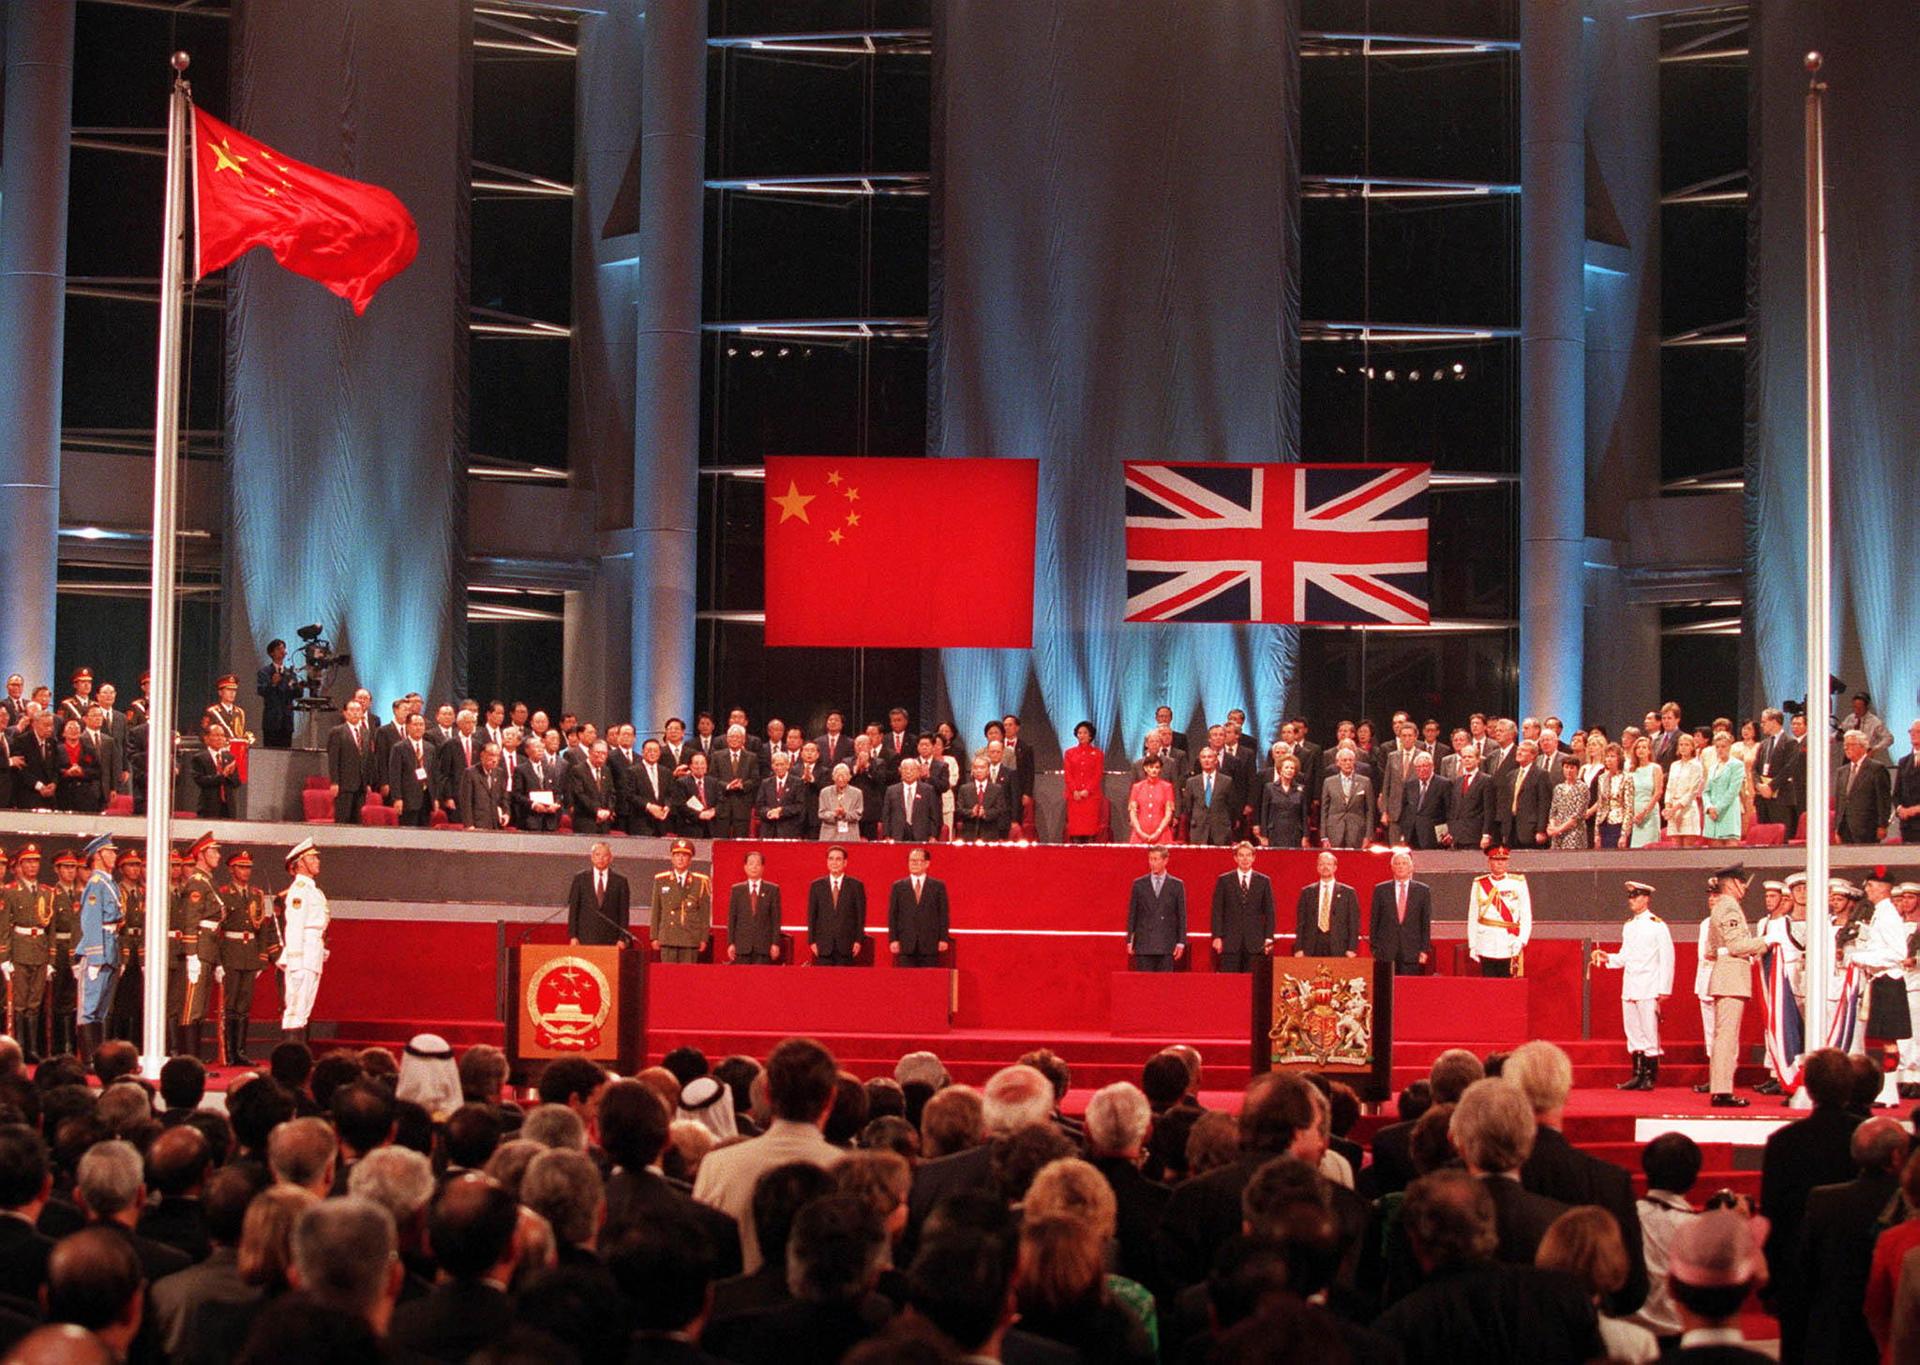 Hong Kong returned to Chinese sovereignty after 156 years of British colonial rule. The handover ceremony shows the Chinese flag flying after the Union flag was lowered on July 1, 1997.